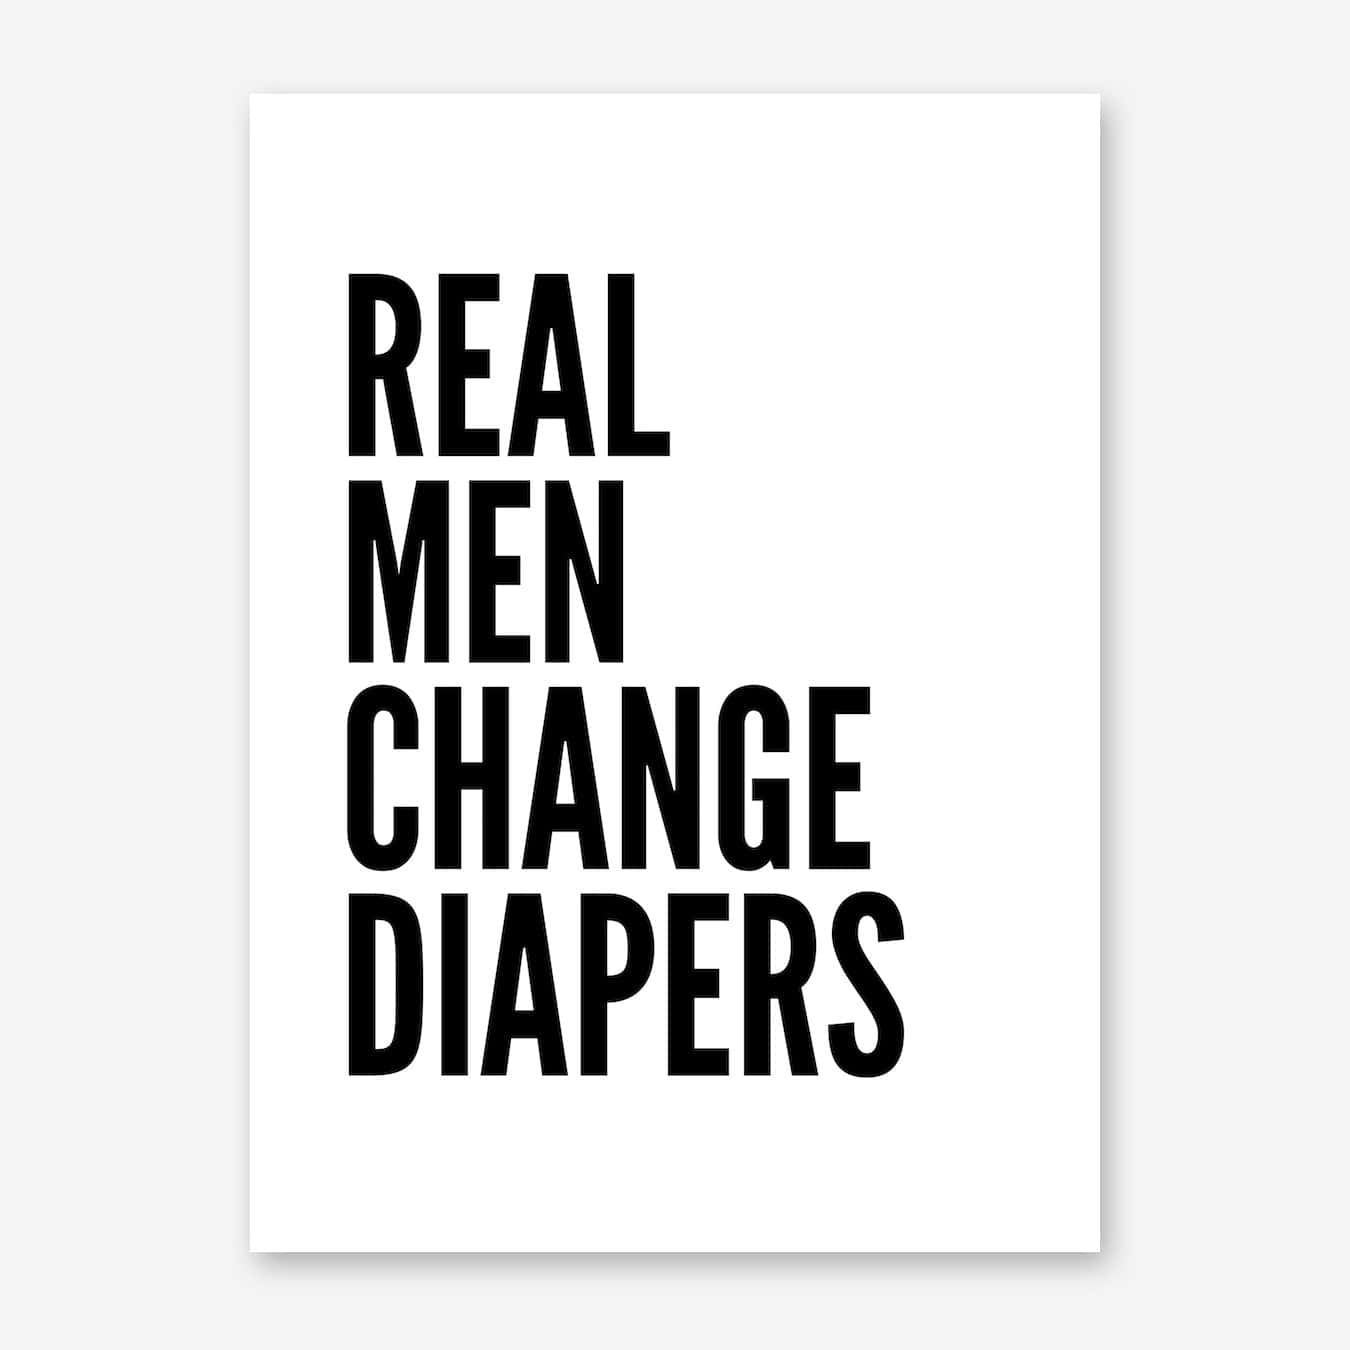 Real Men Change Diapers Poster